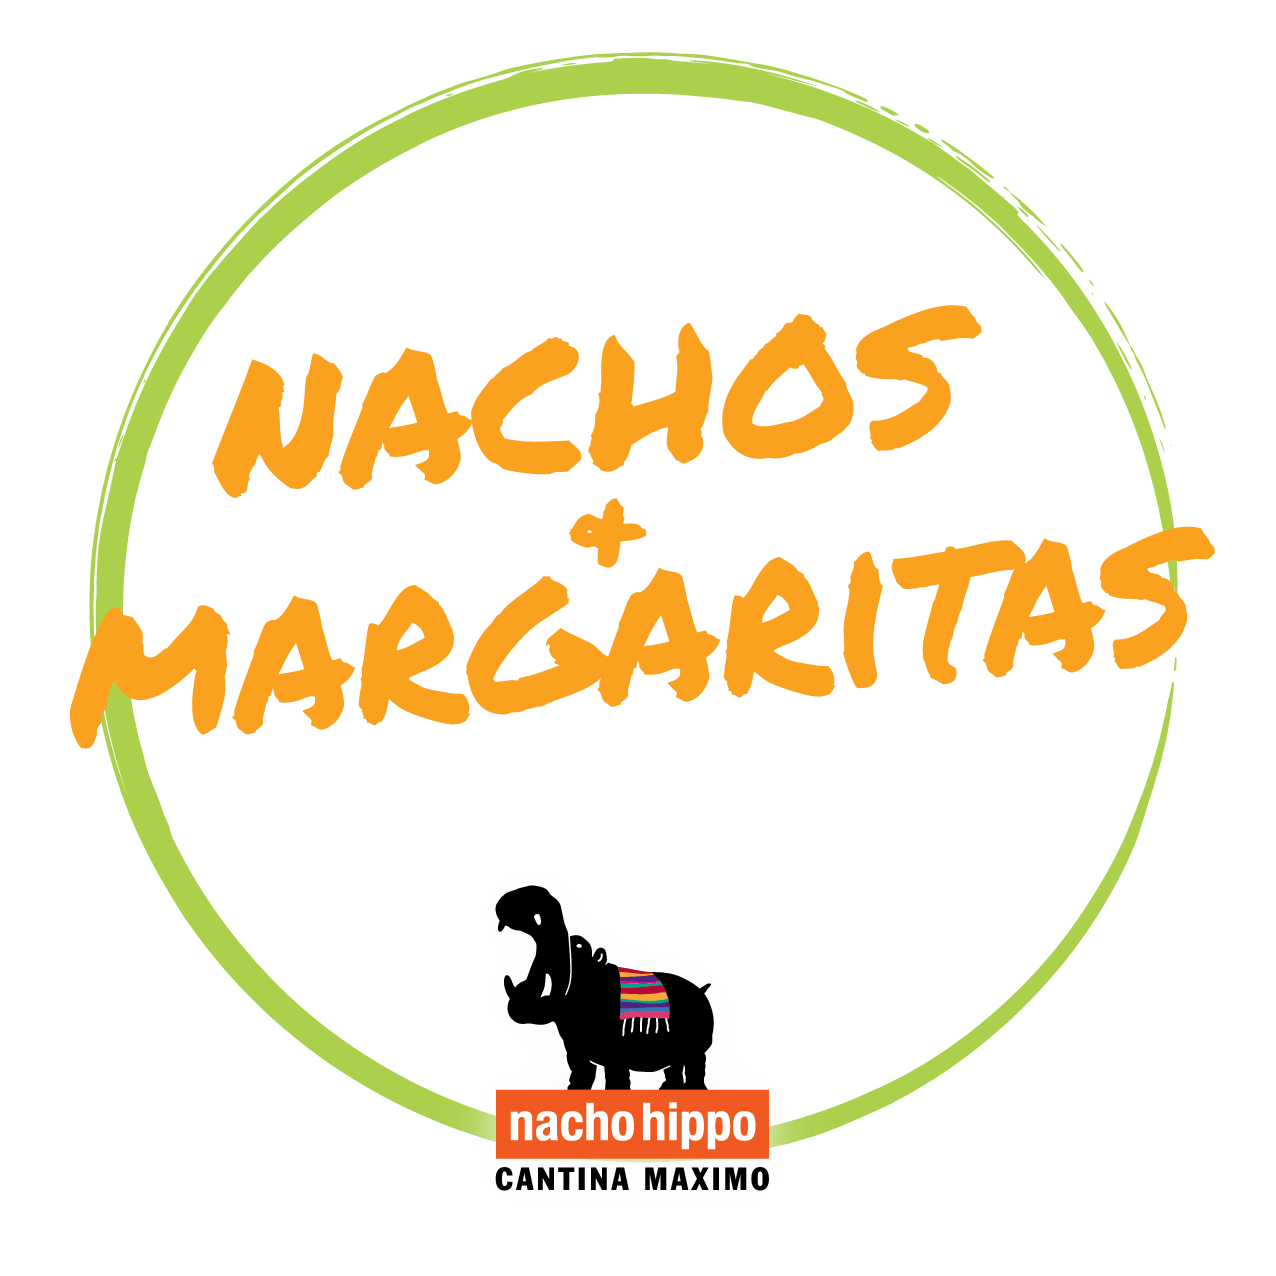 The Best Nachos and Margaritas on the beach